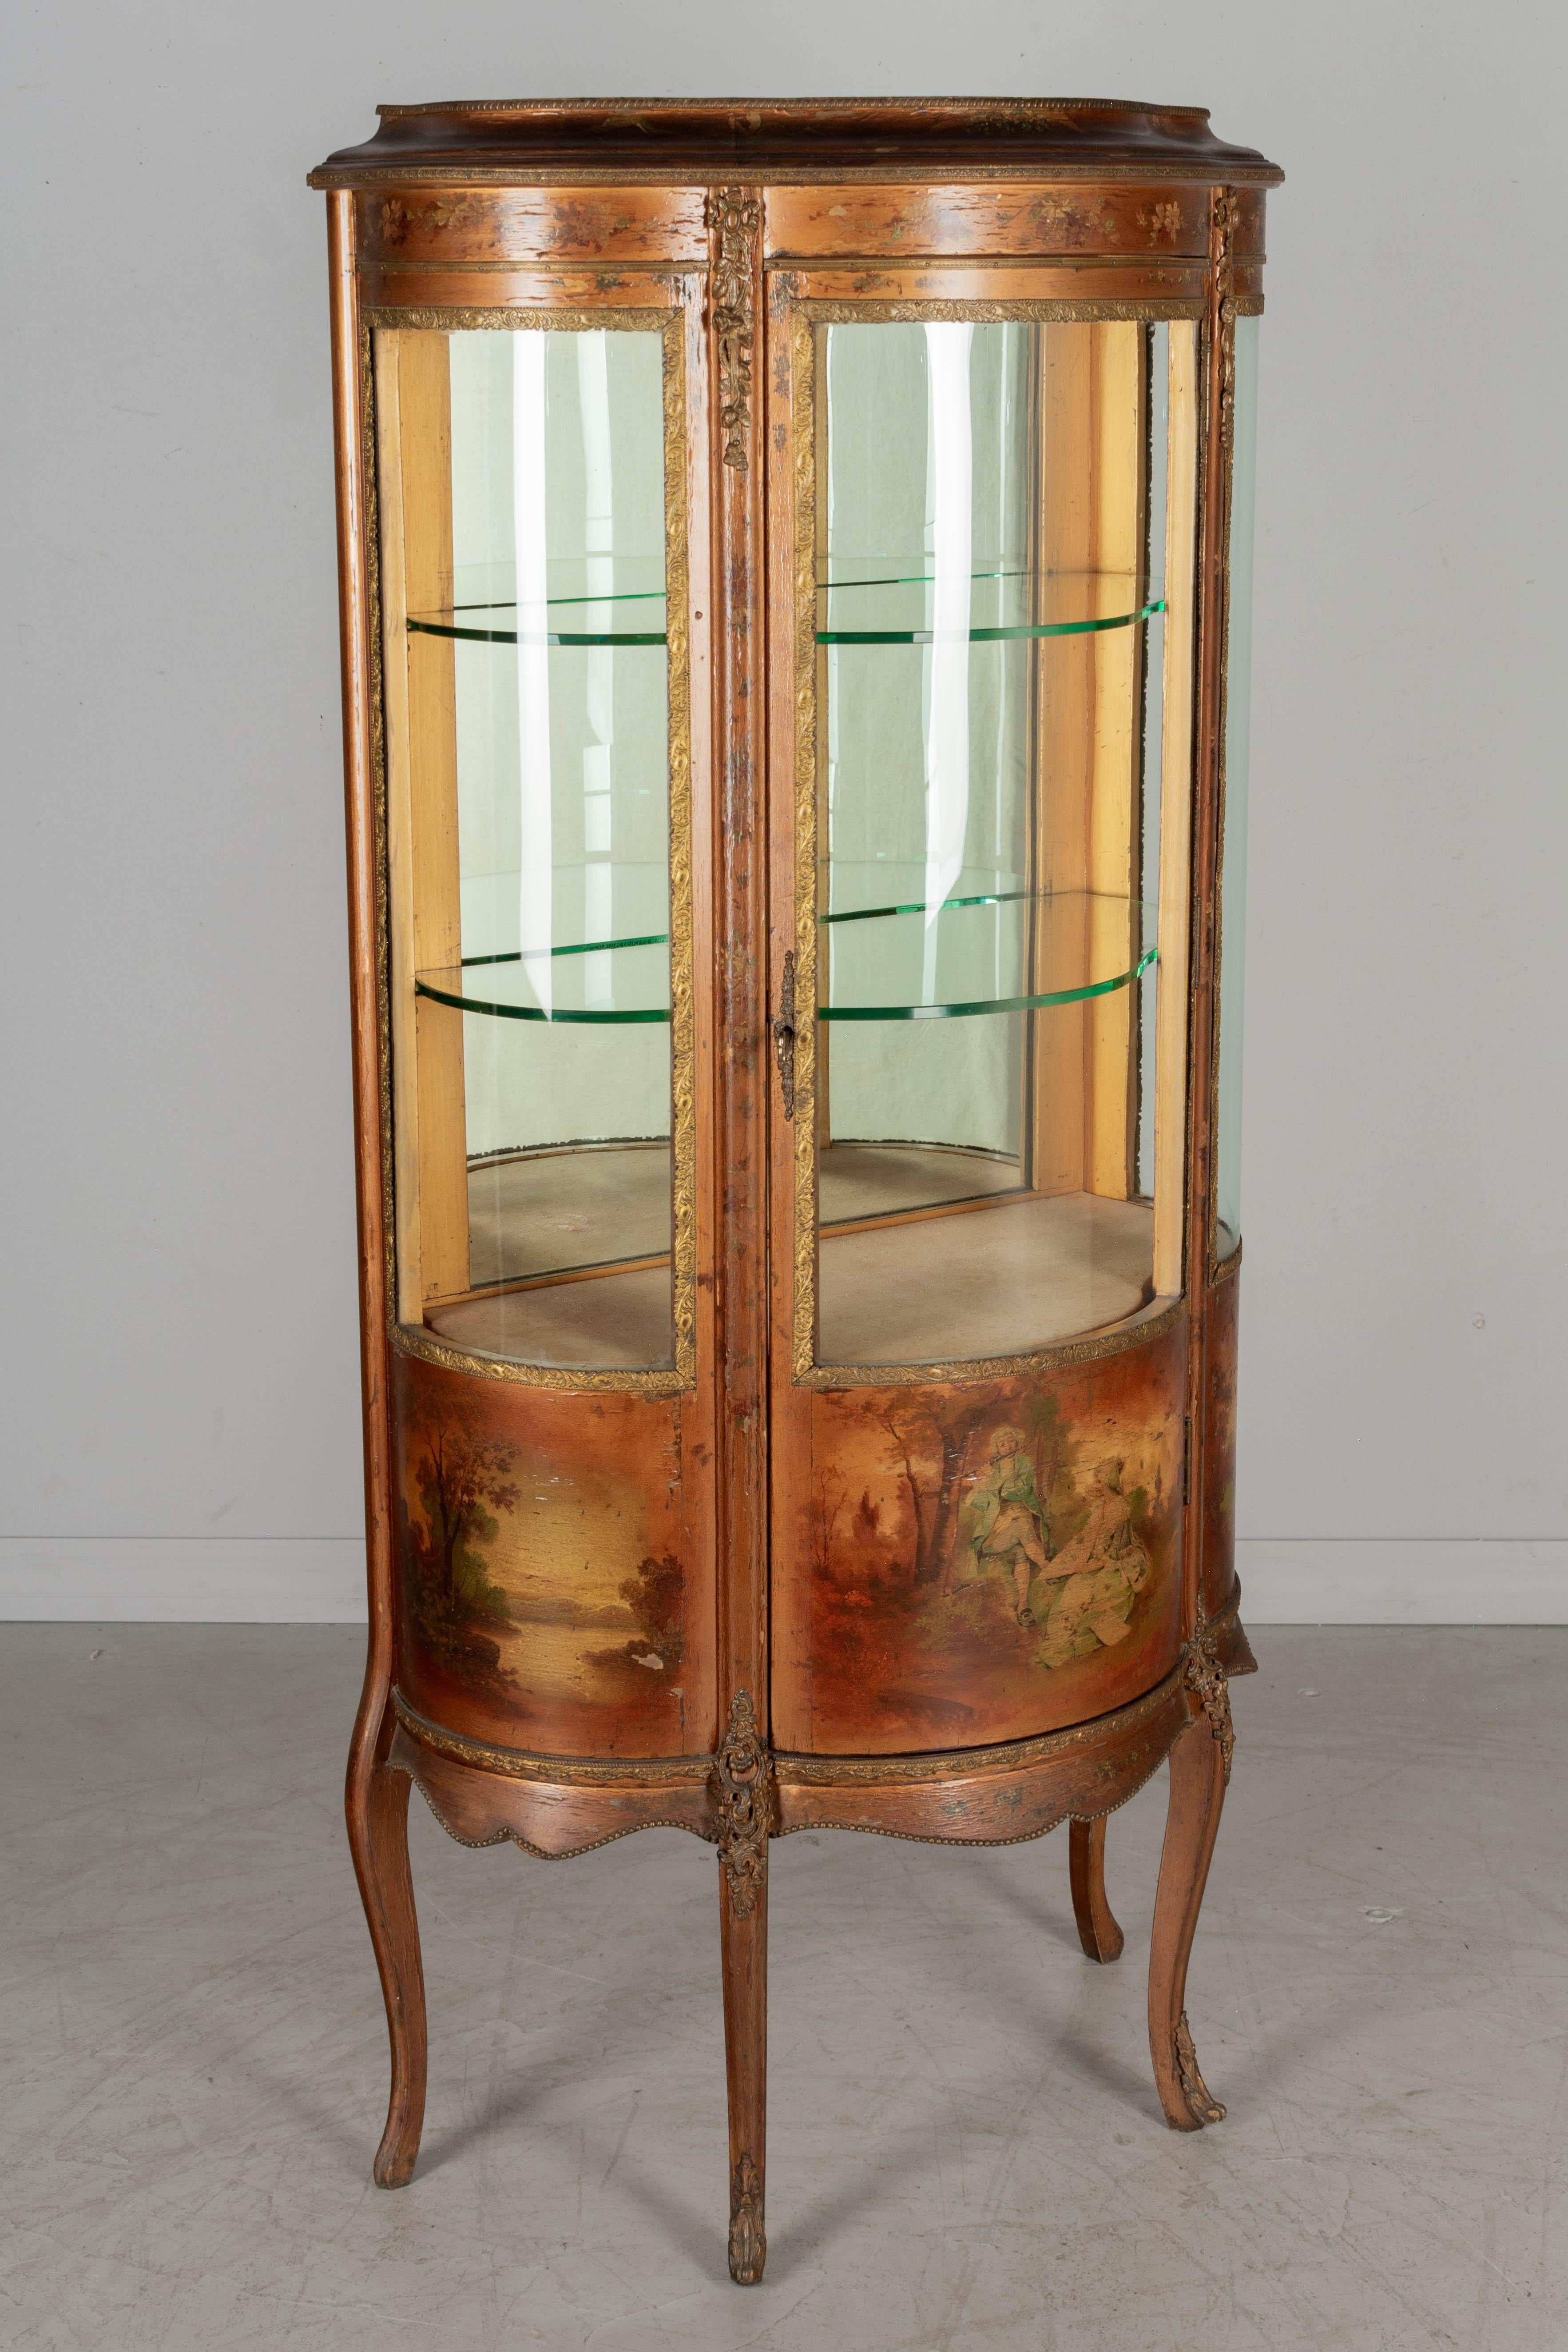 French Louis XVI Style Vernis Martin Decorated Giltwood Vitrine In Good Condition For Sale In Winter Park, FL